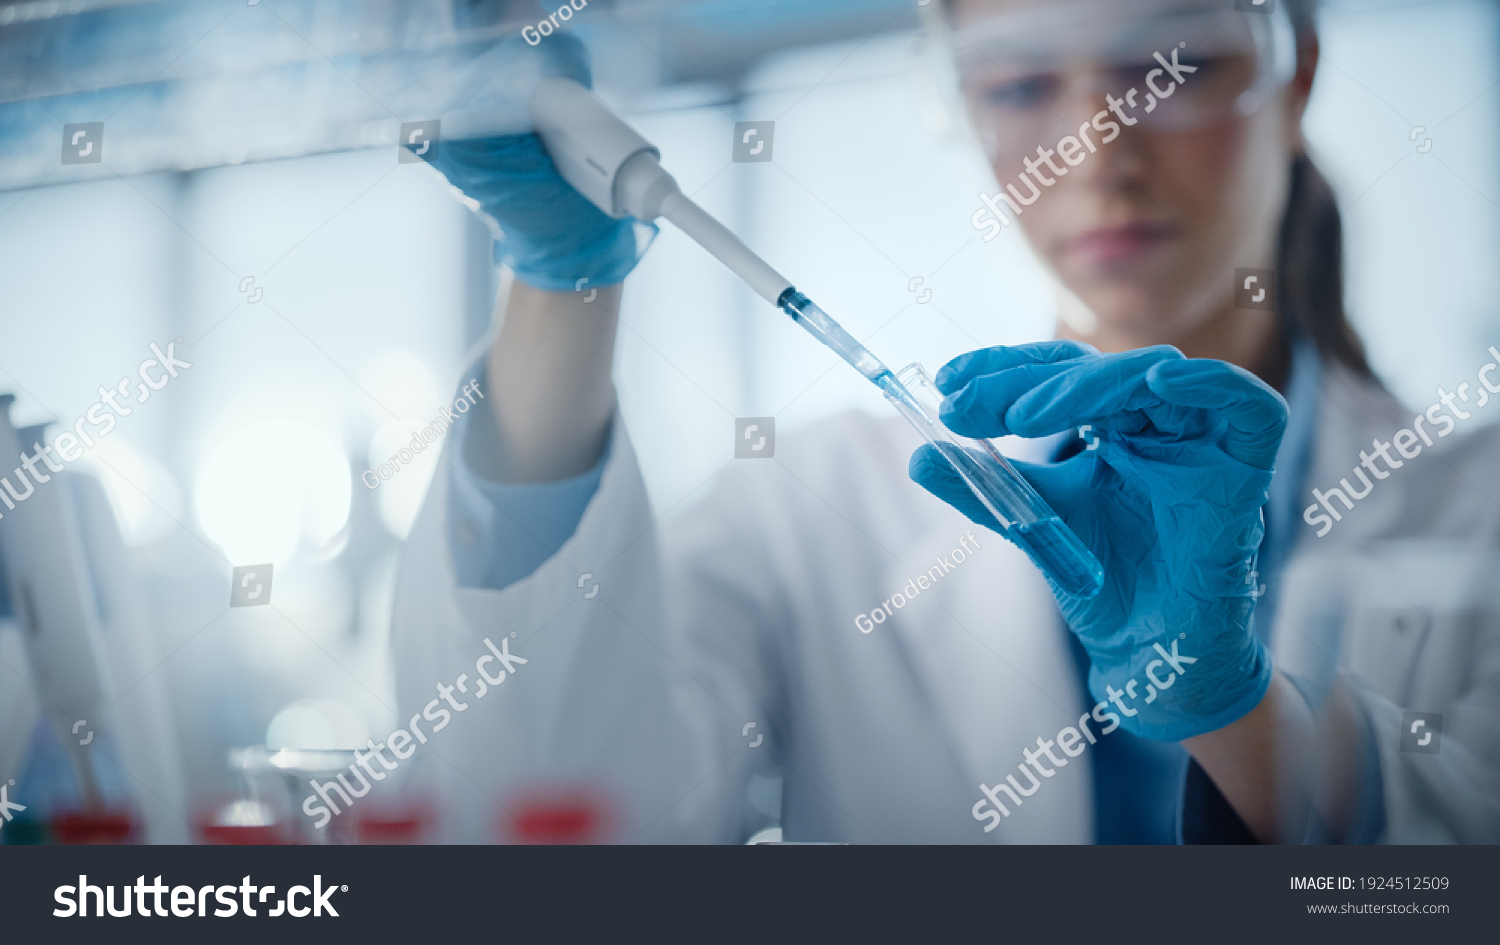 Medical Research Laboratory: Portrait of a Beautiful Female Scientist Using Micro Pipette for Analysis. Advanced Scientific Lab for Medicine, Biotechnology, Microbiology Development. Hands Close-up #1924512509